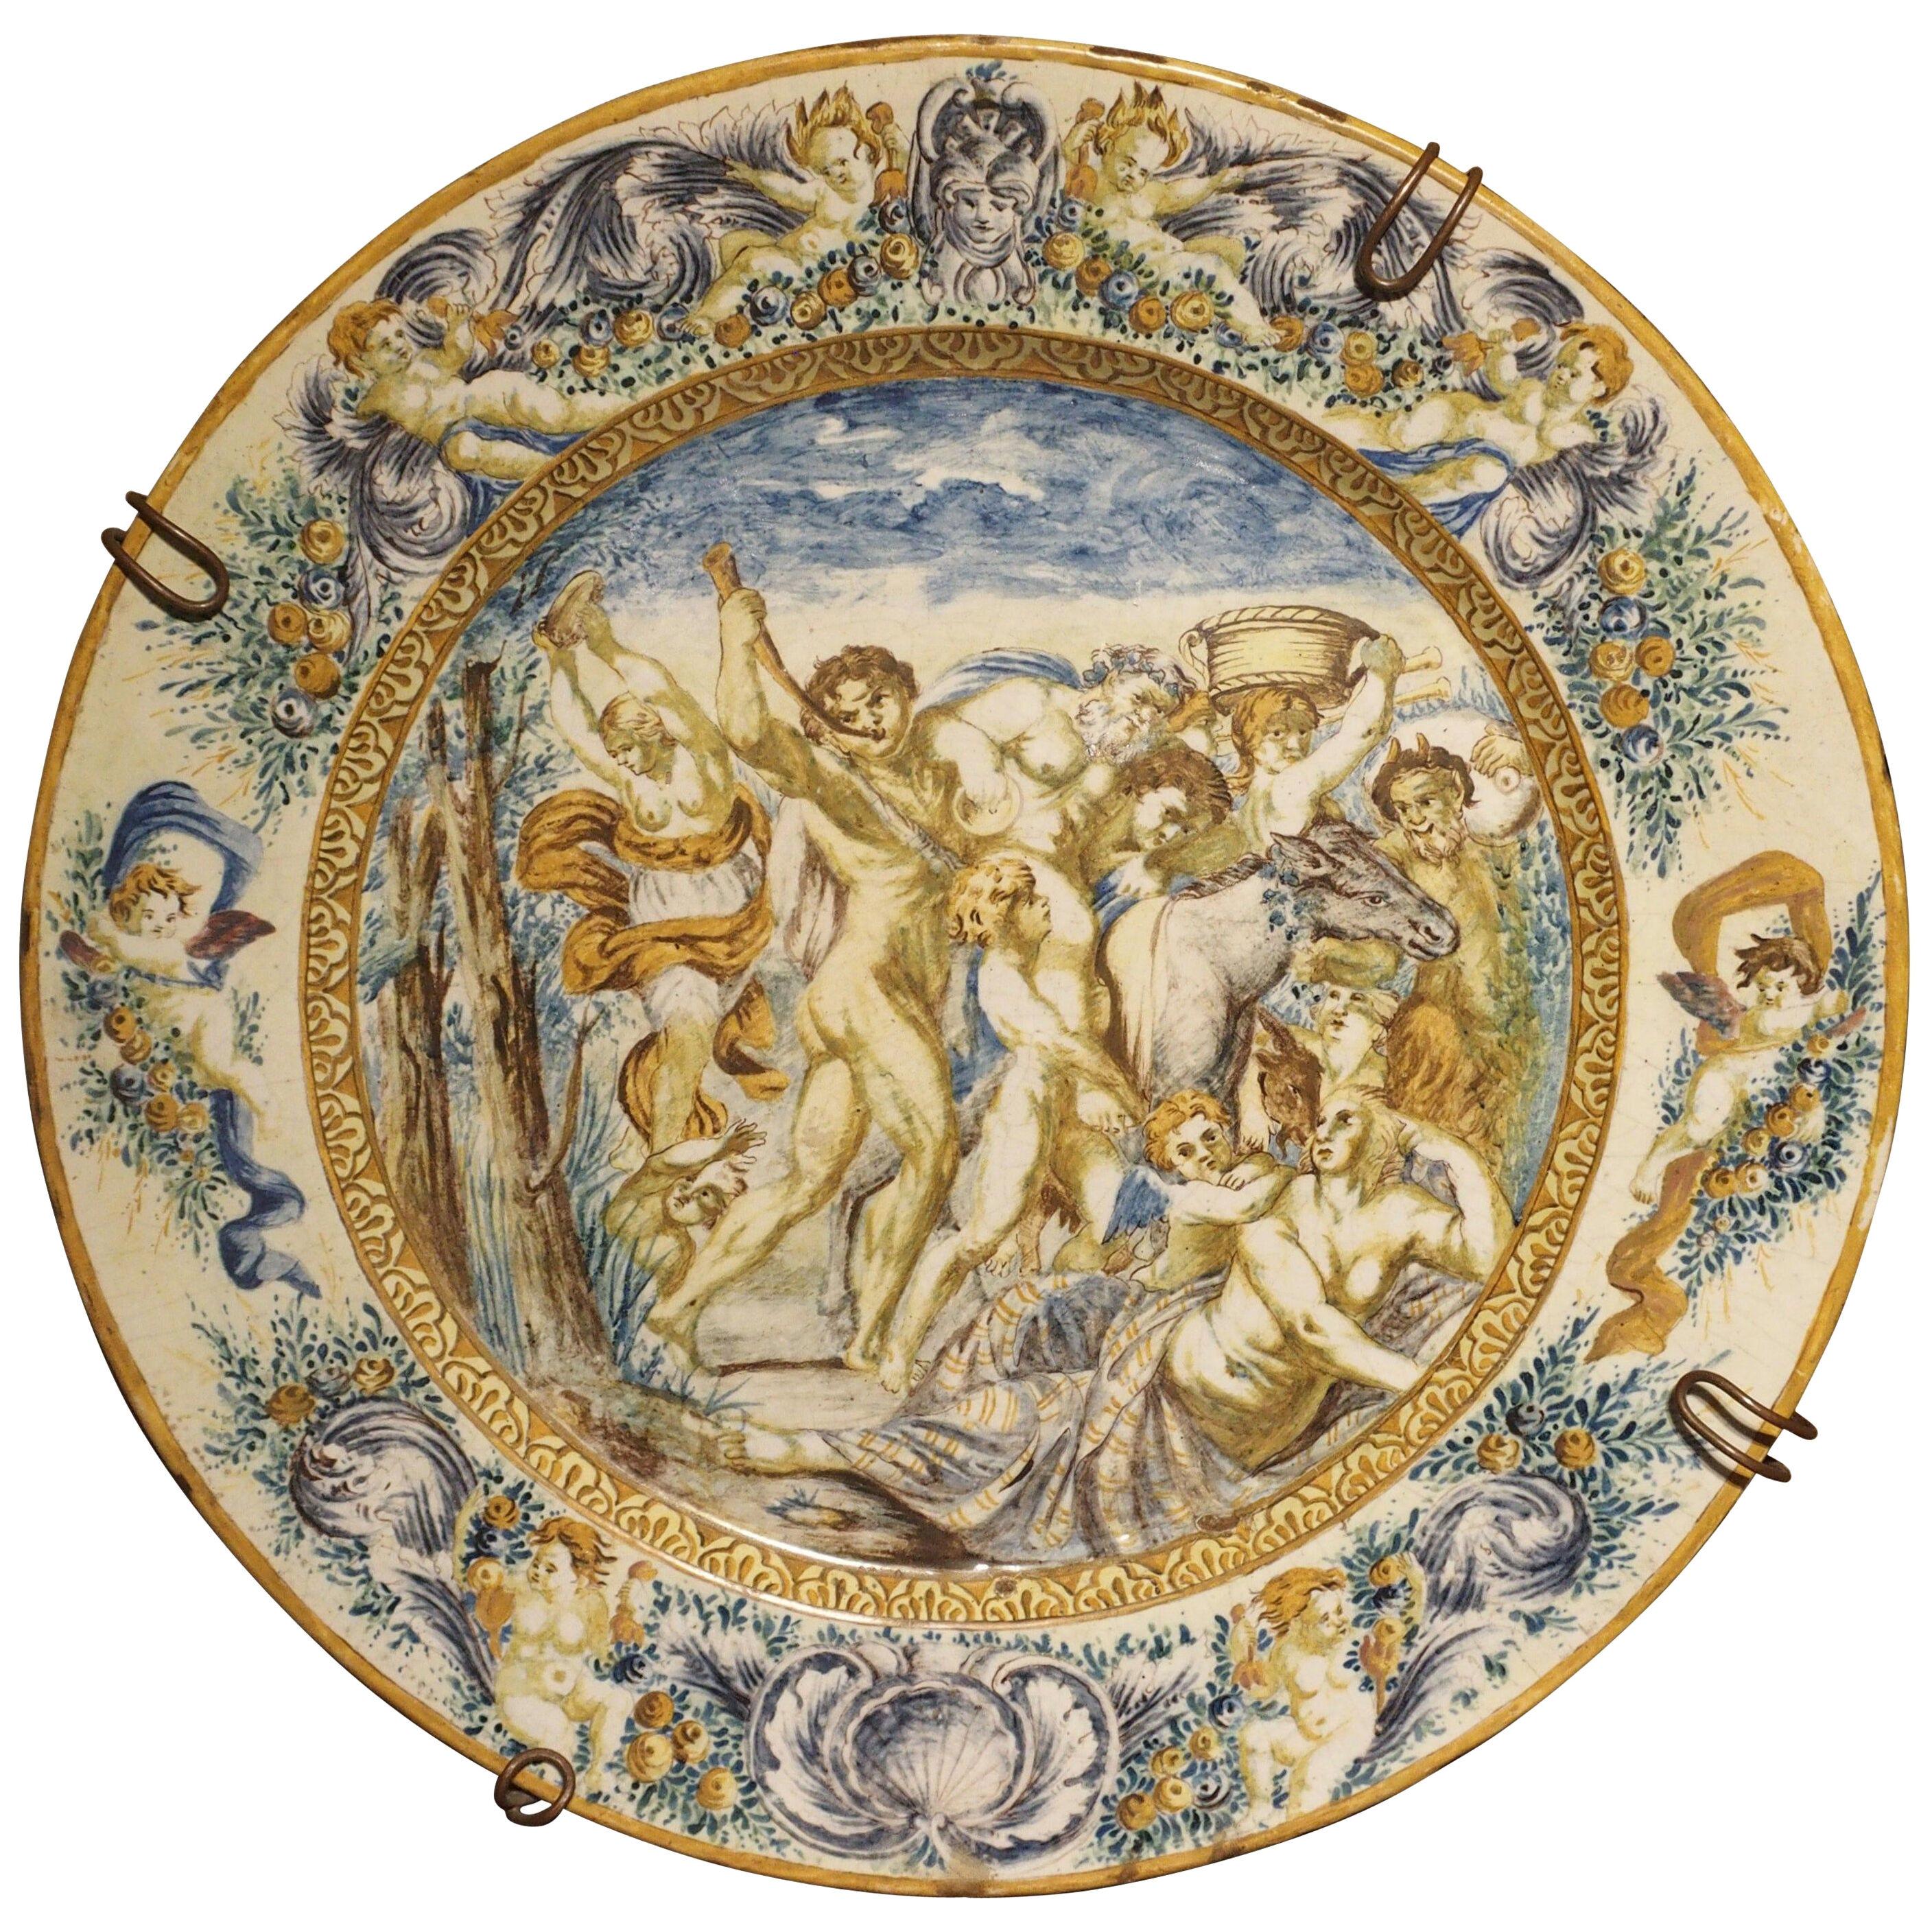 Large Antique Hand Painted Majolica Platter from Italy, circa 1860